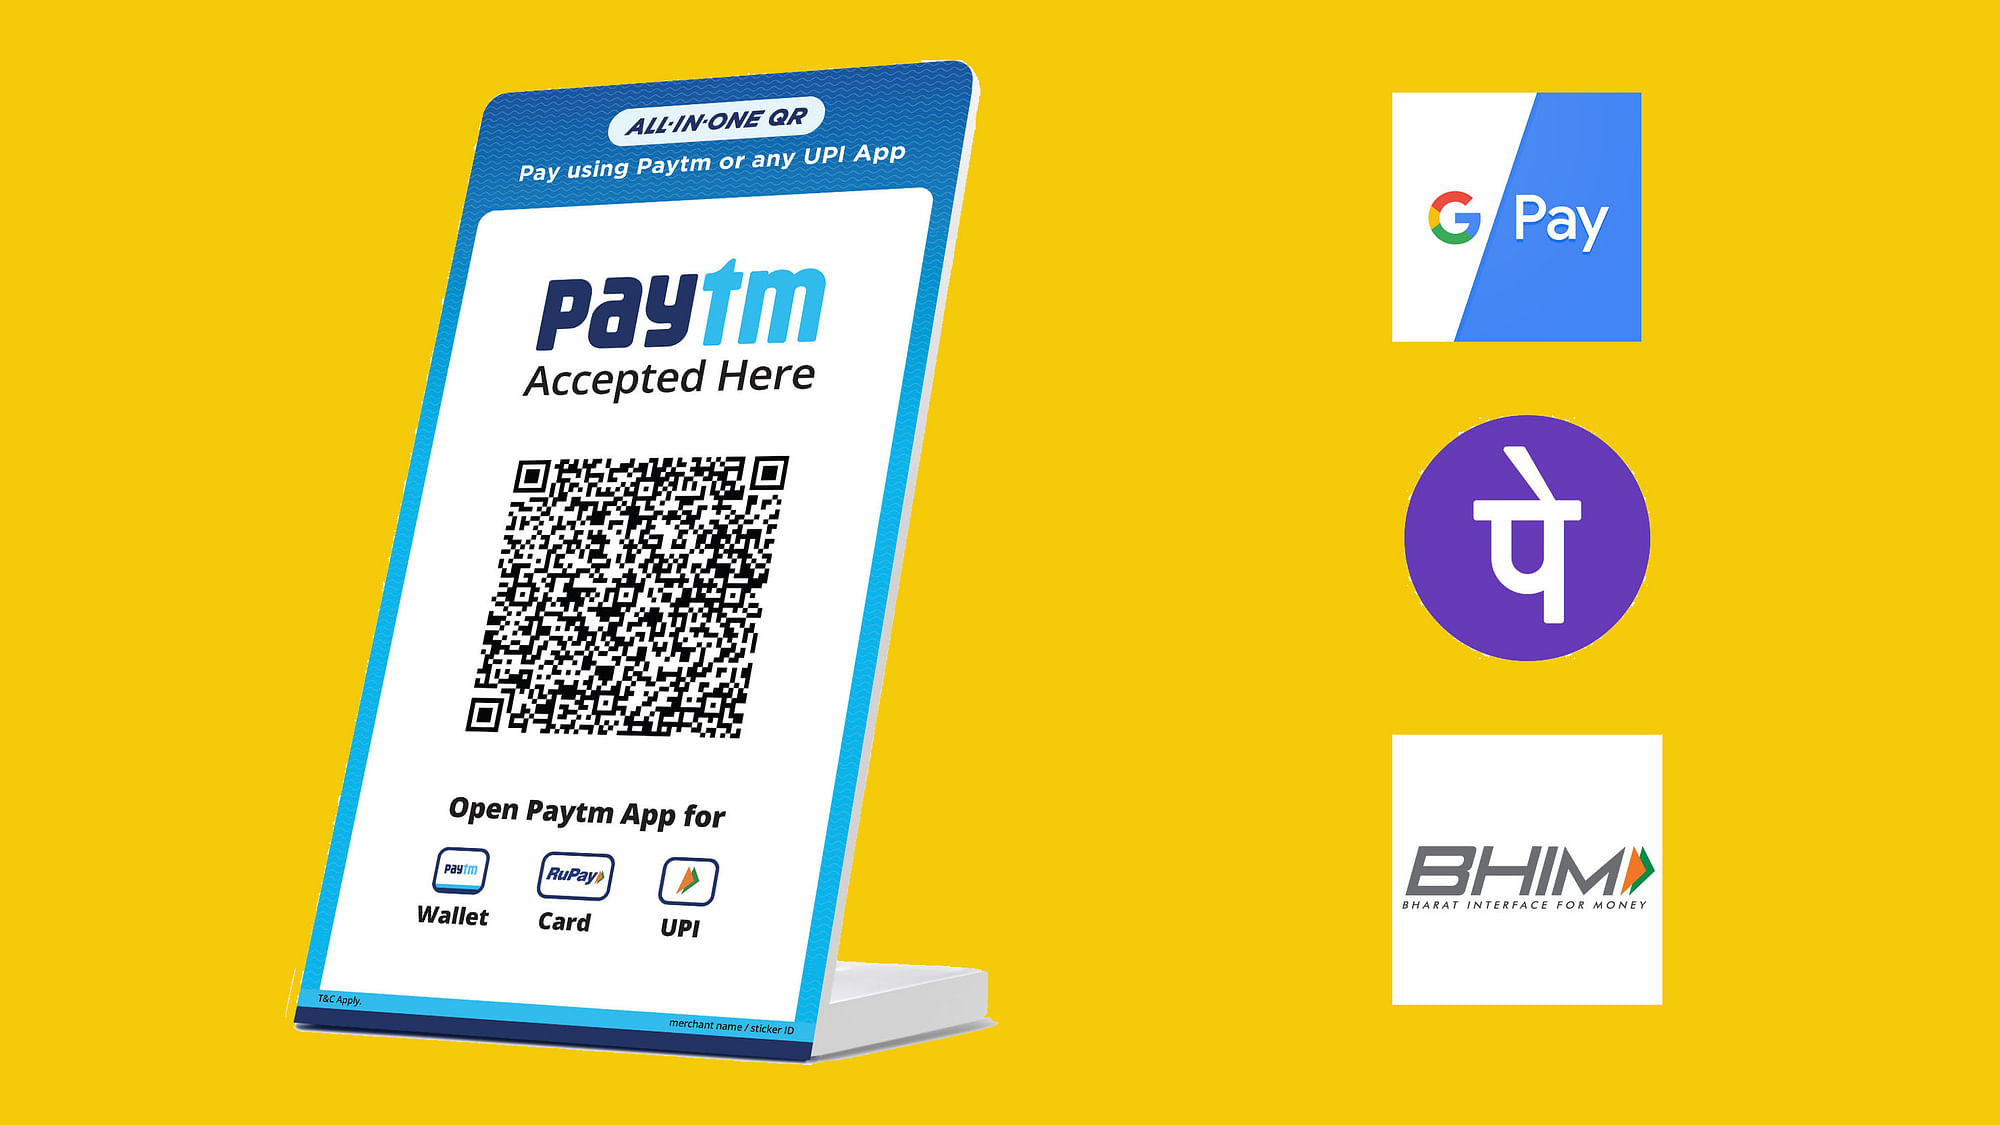 How to Transfer Money Without Via Google Pay, PhonePe, Paytm